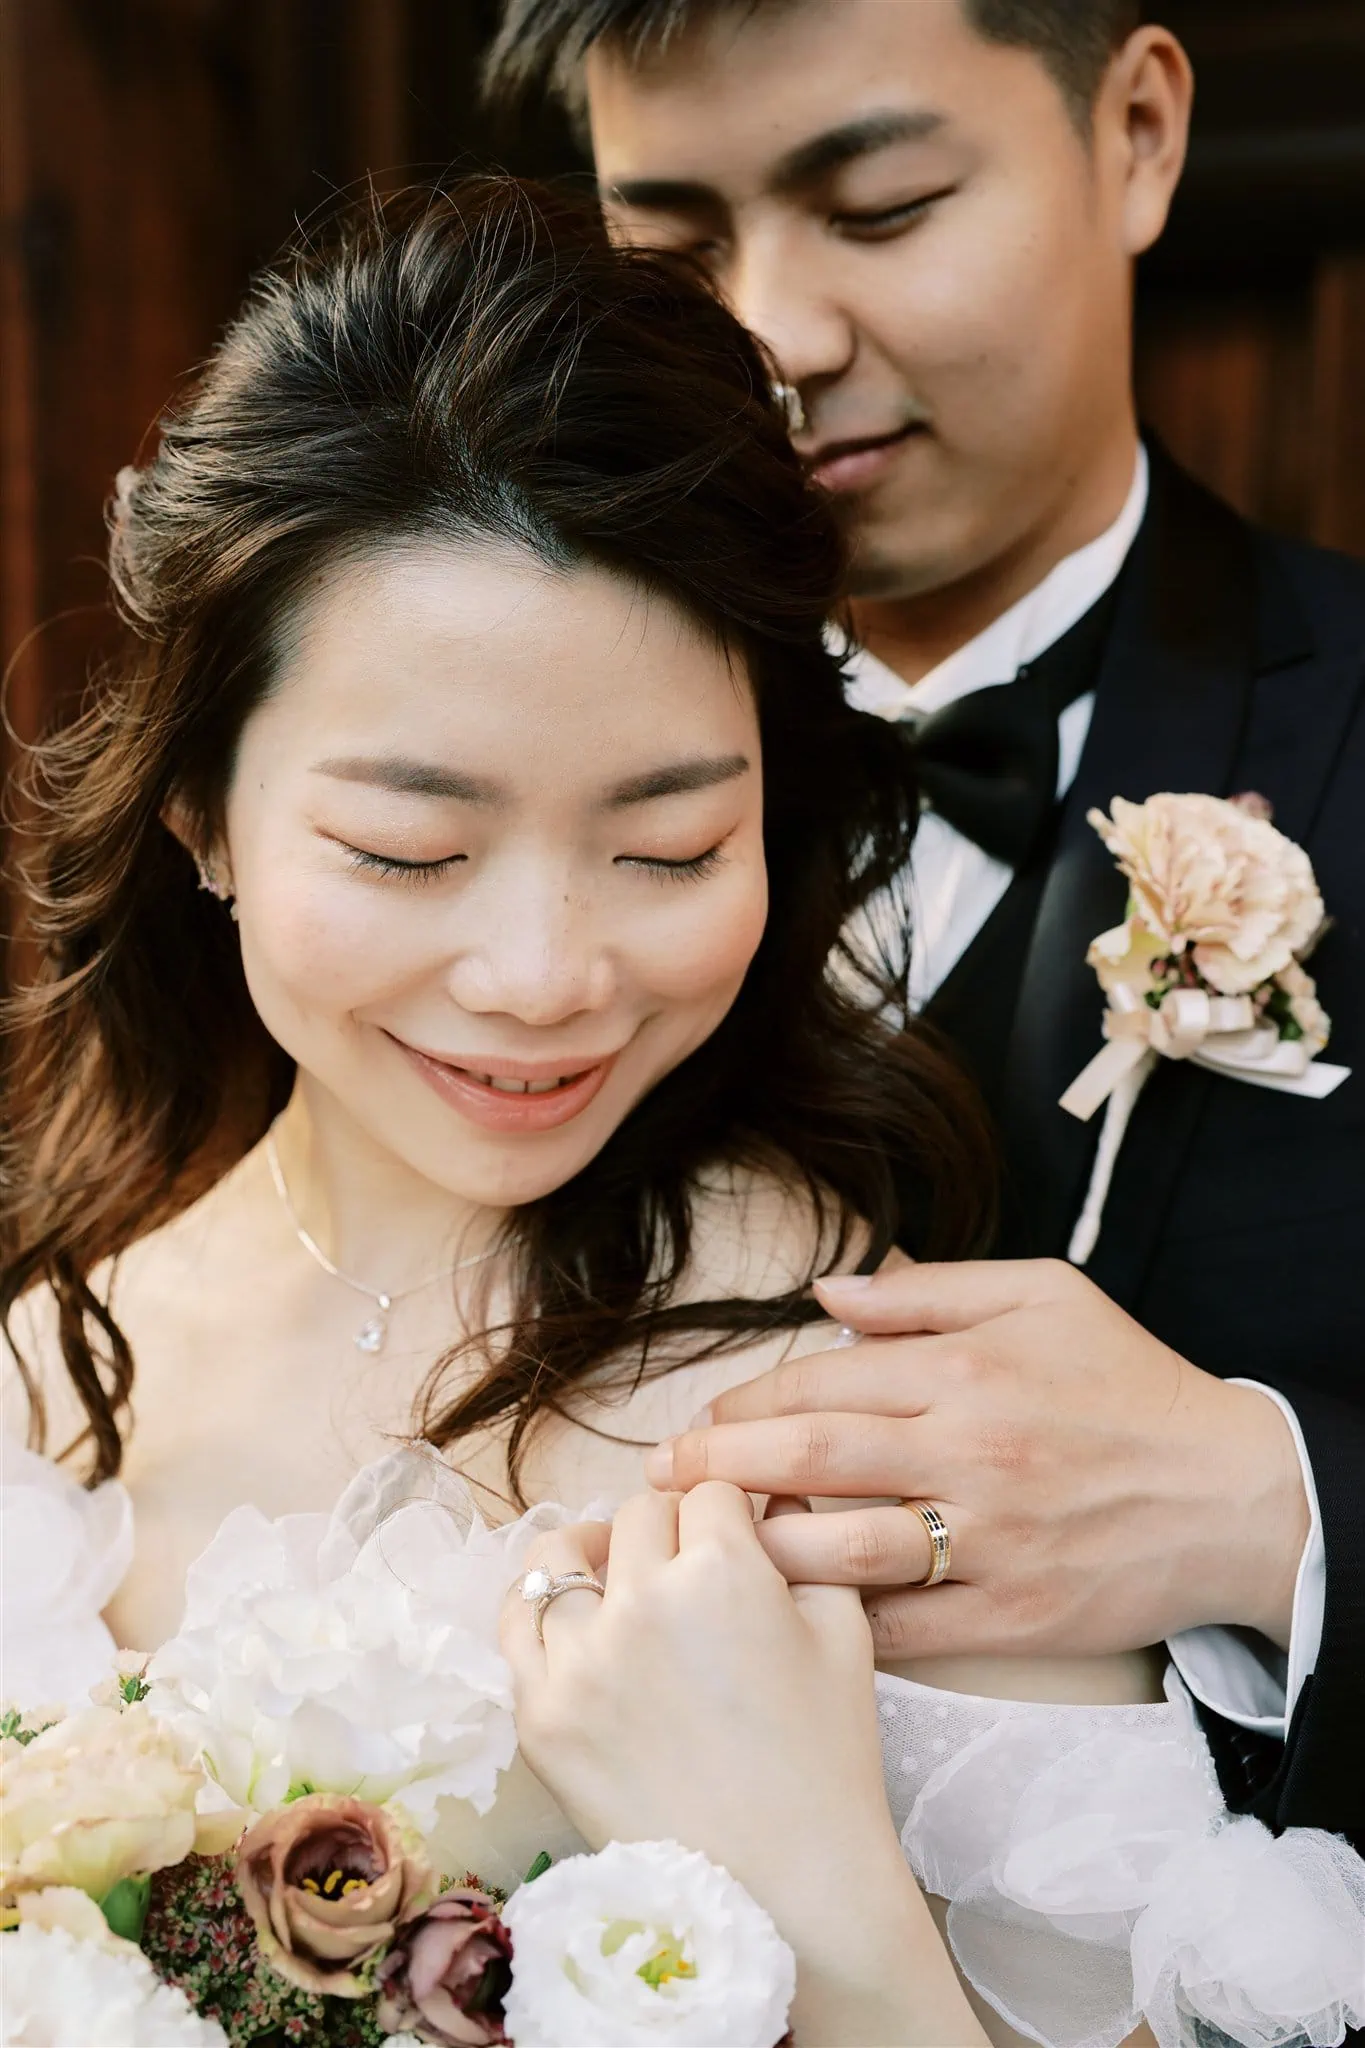 Kyoto Tokyo Japan Elopement Wedding Photographer, Planner & Videographer | A Japan elopement photographer captures an intimate moment as a bride and groom embrace each other in front of a stunning building.